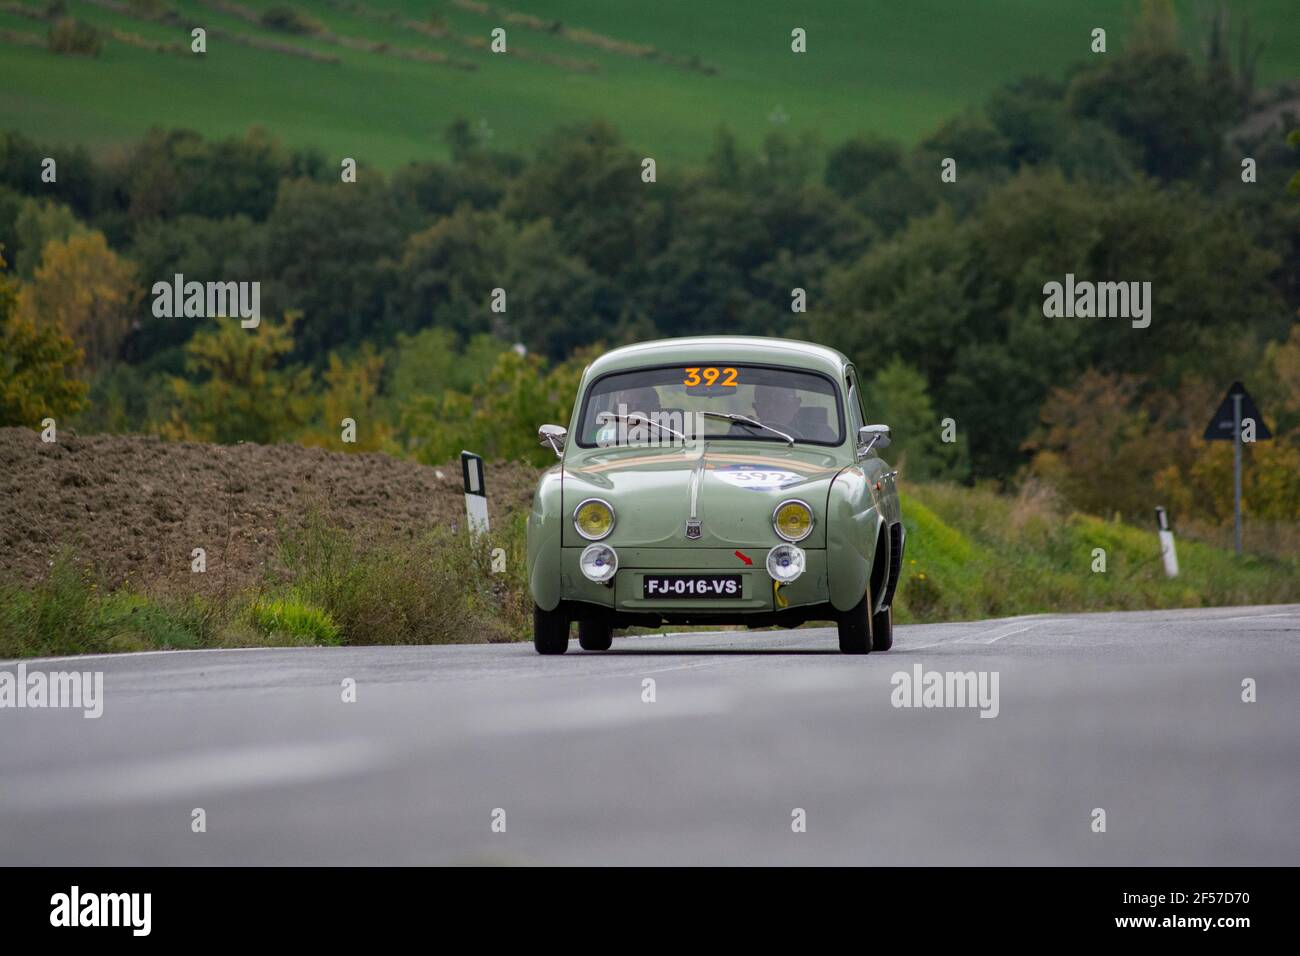 CAGLI , ITALY - OTT 24 - 2020 : RENAULT DAUPHINE 1957 on an old racing car in rally Mille Miglia 2020 the famous italian historical race (1927-1957 Stock Photo